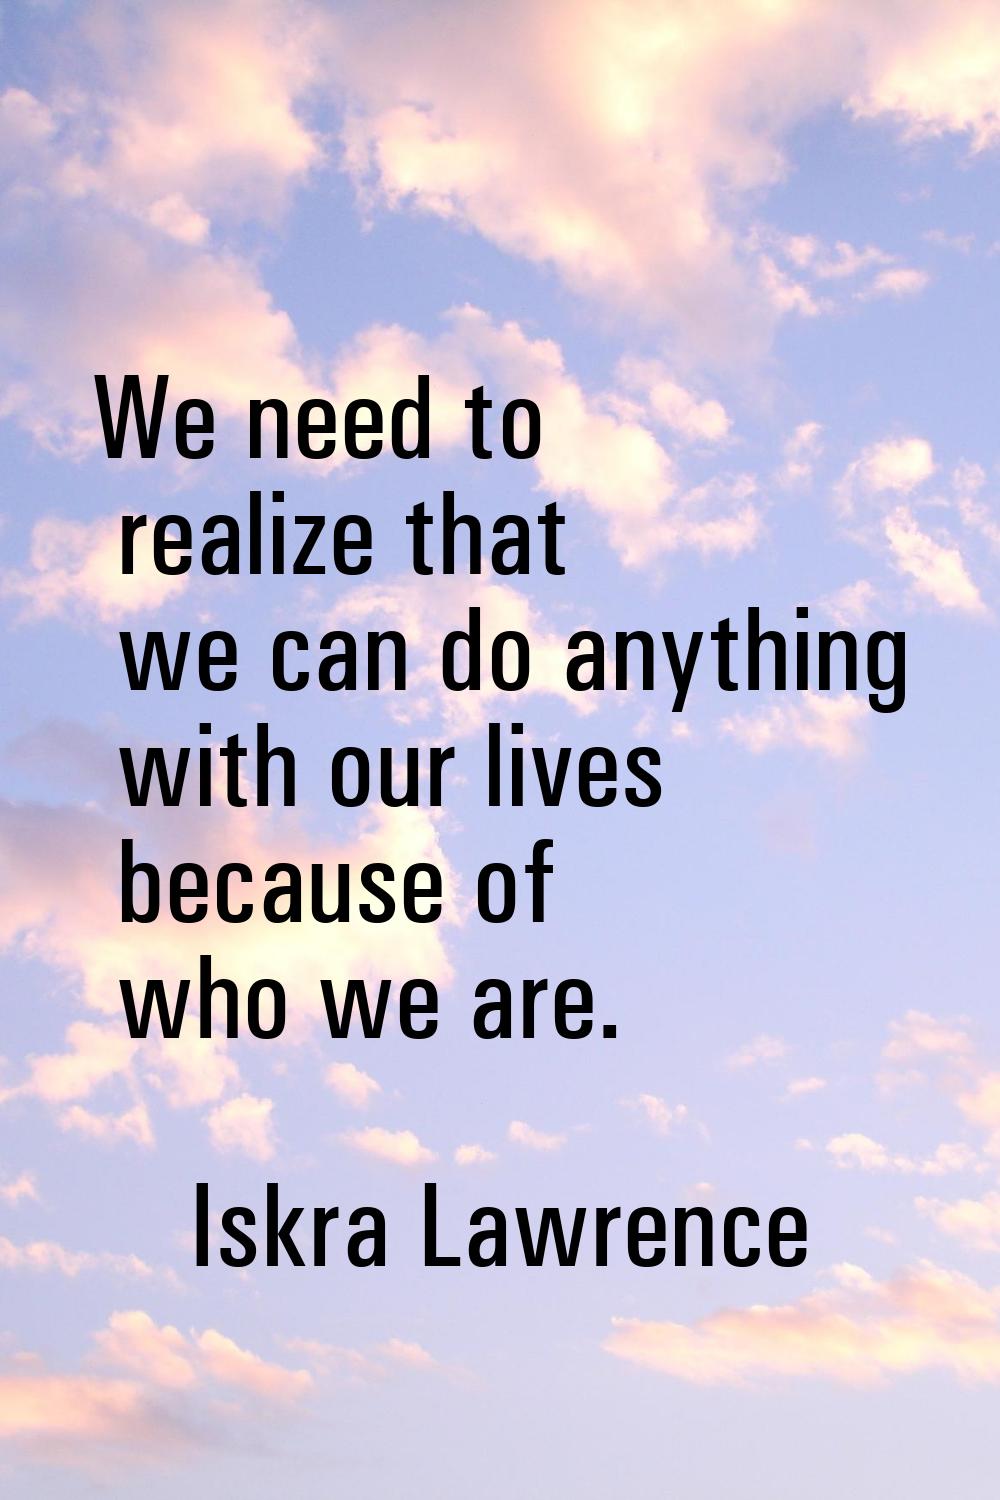 We need to realize that we can do anything with our lives because of who we are.